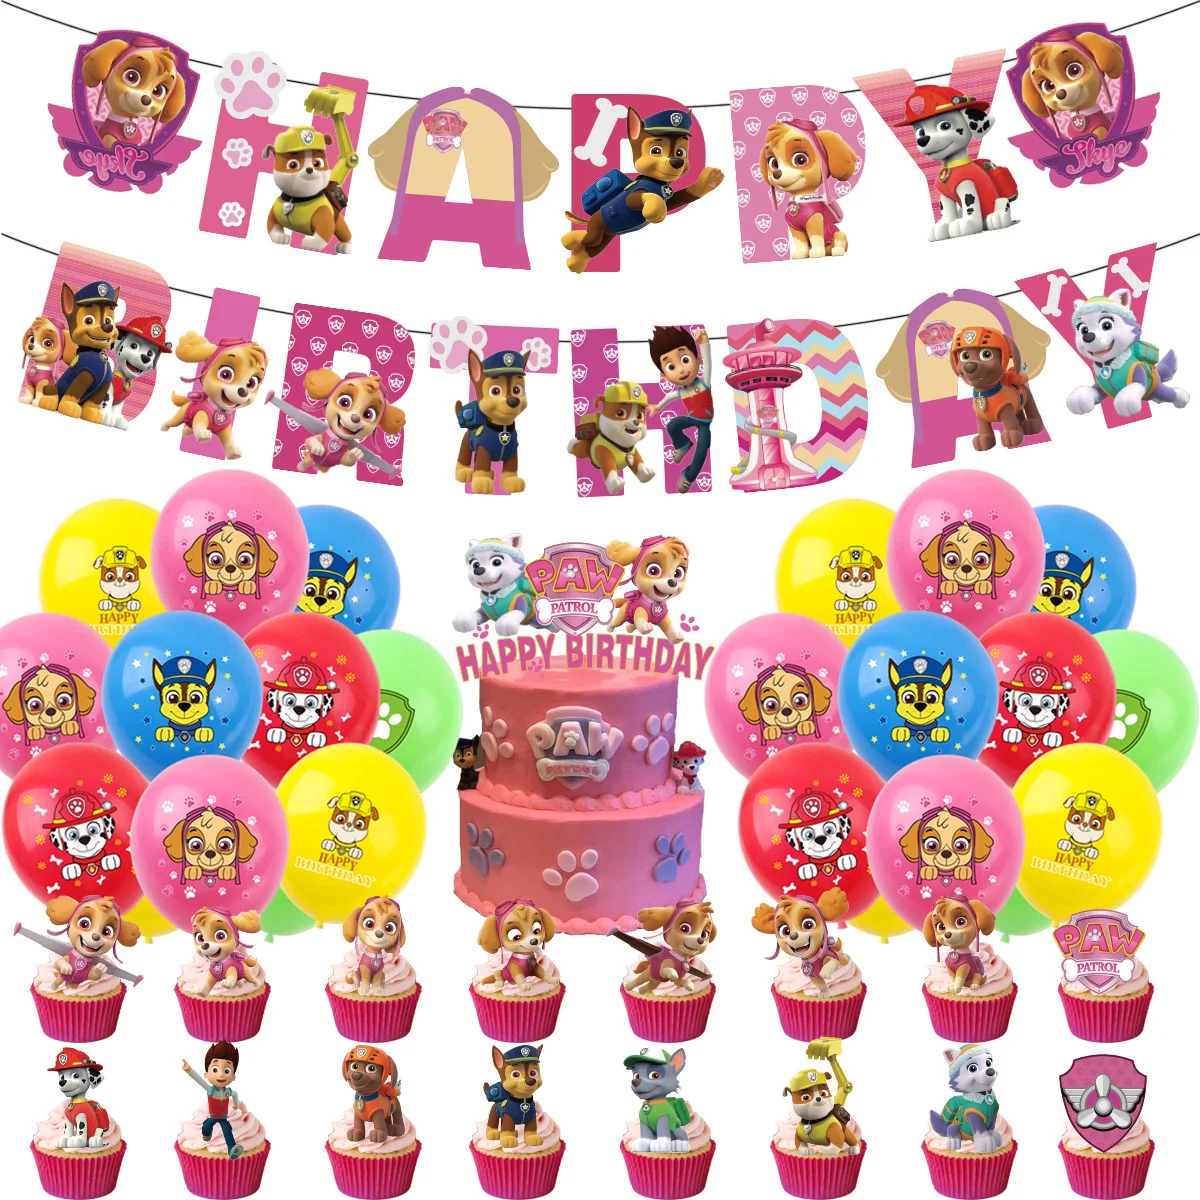 

Paw Patrol Theme Cartoon Birthday Party Supplies Pull Flag Banner Balloons Cake Insert Decoration Supplies Toys Birthday Gifts